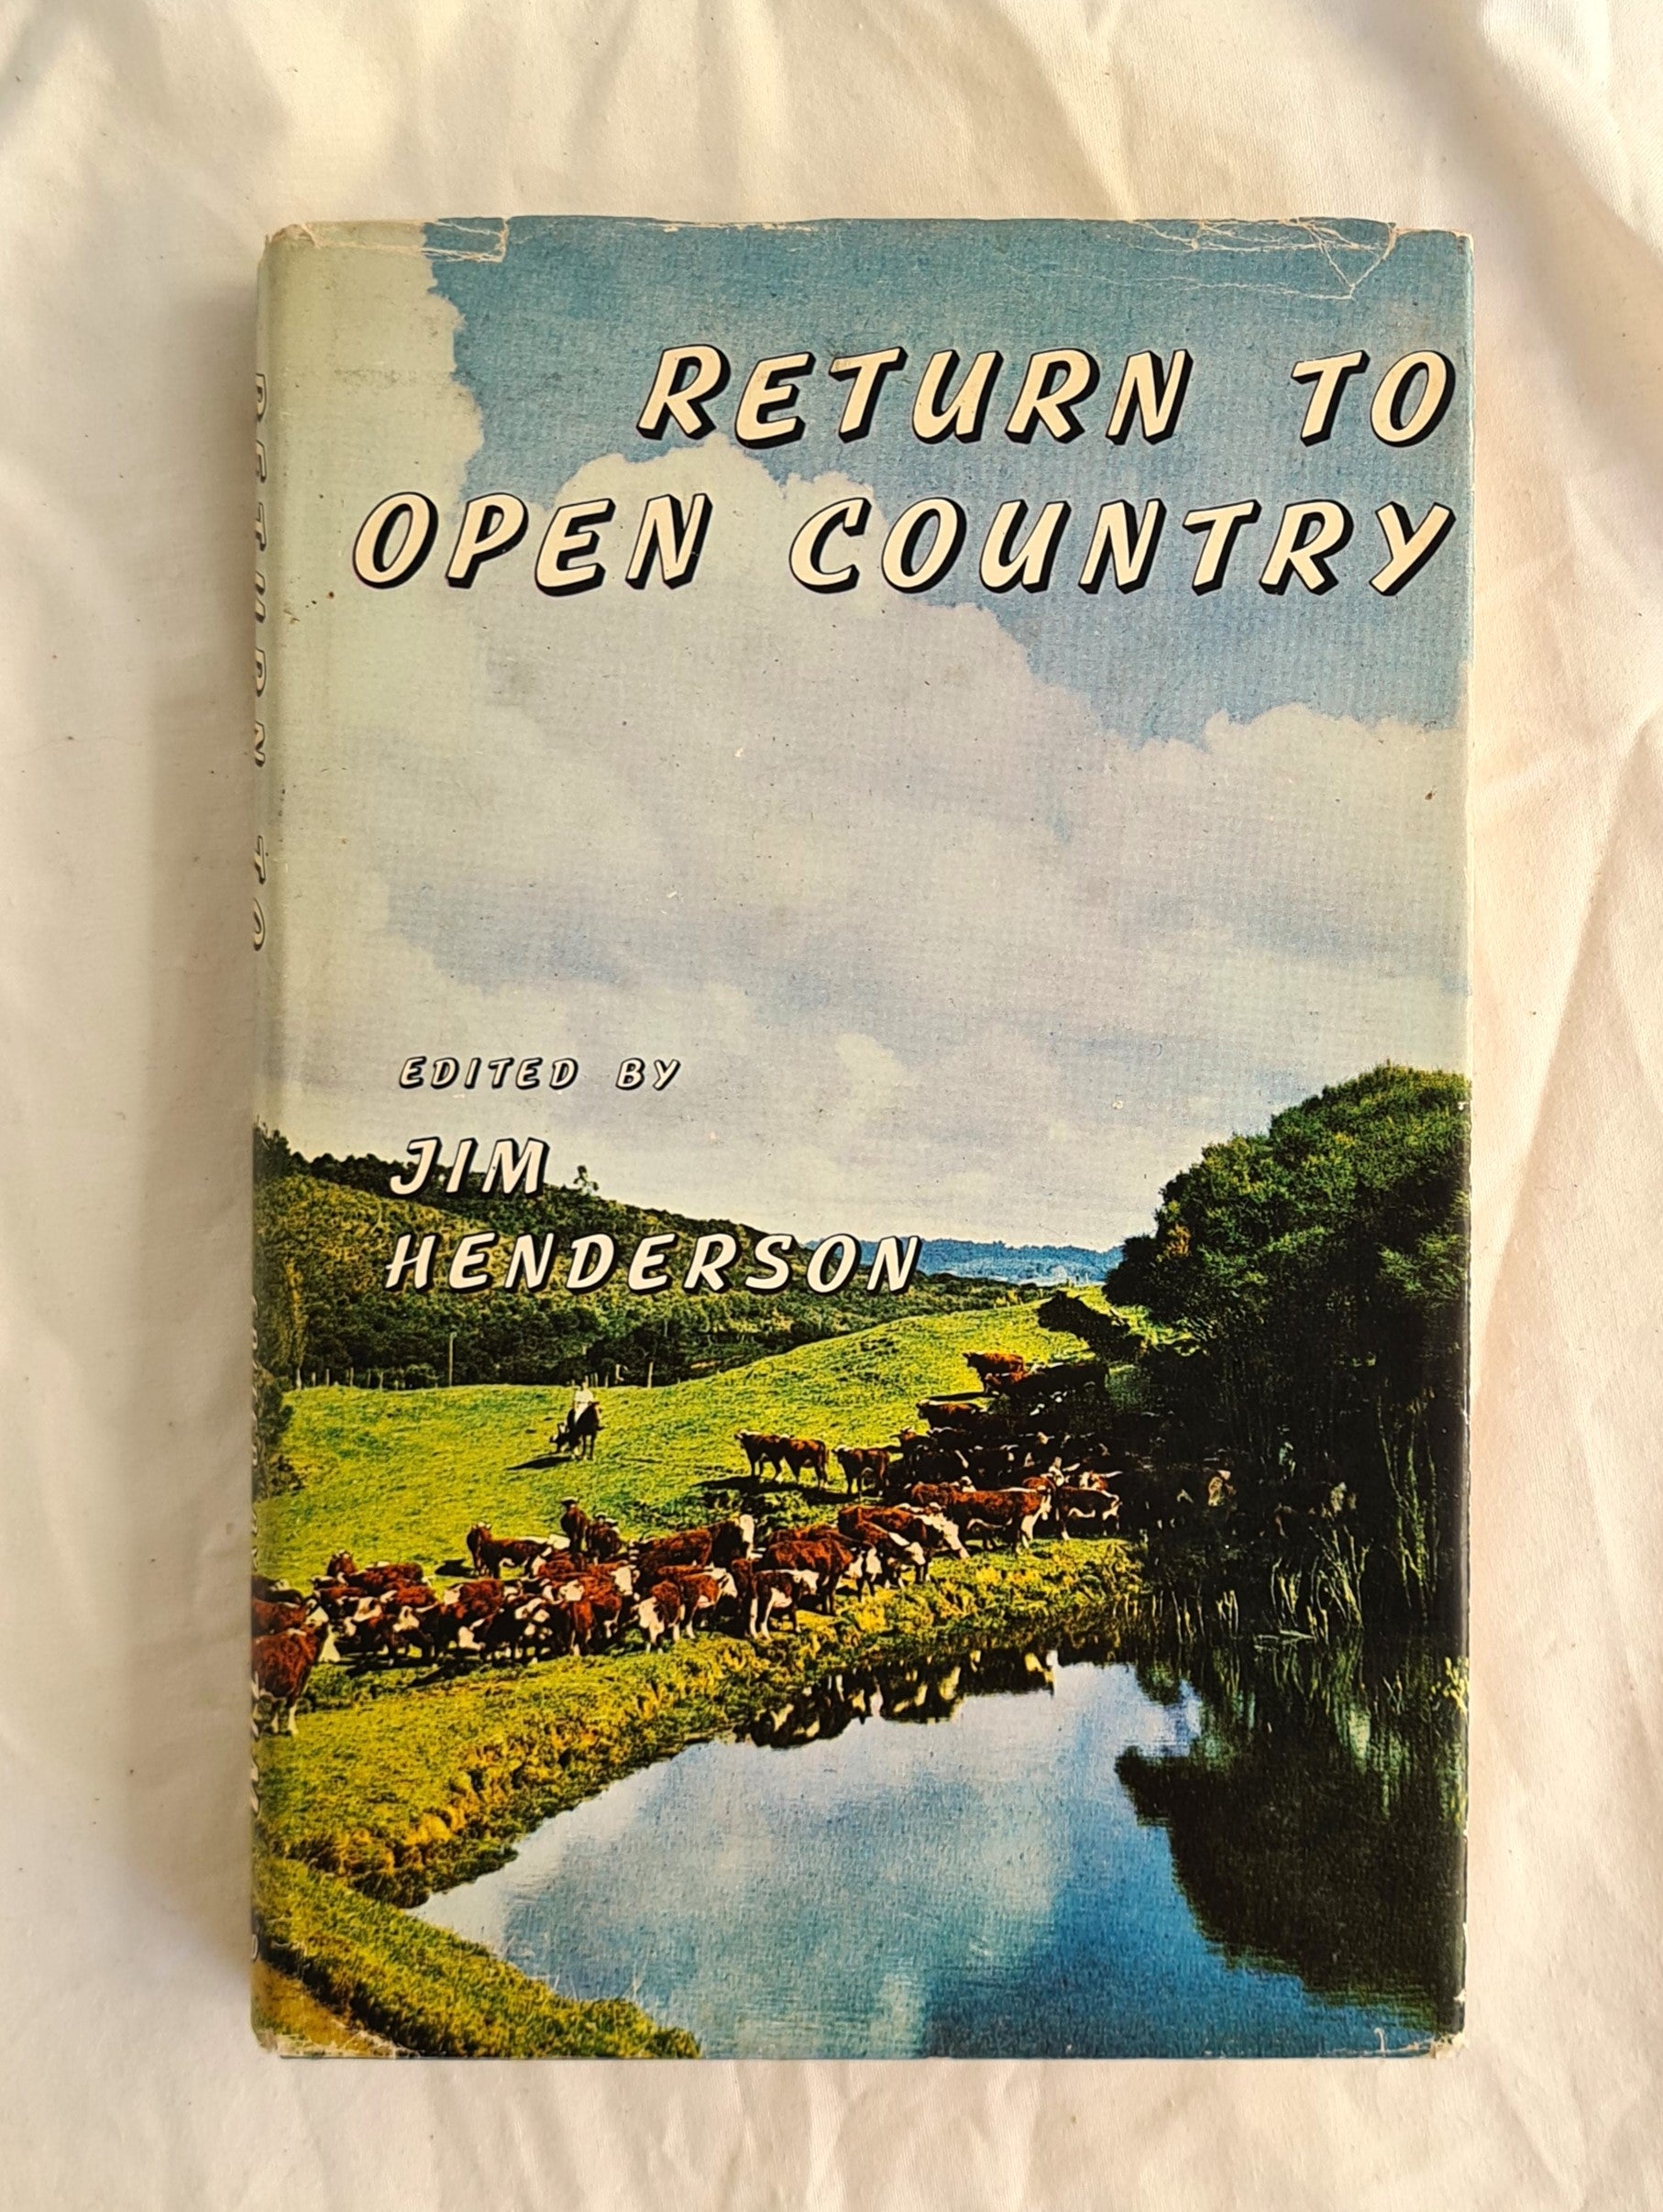 Return to Open Country  People and Places out of Town  by Jim Henderson  illustrated by David Cowe